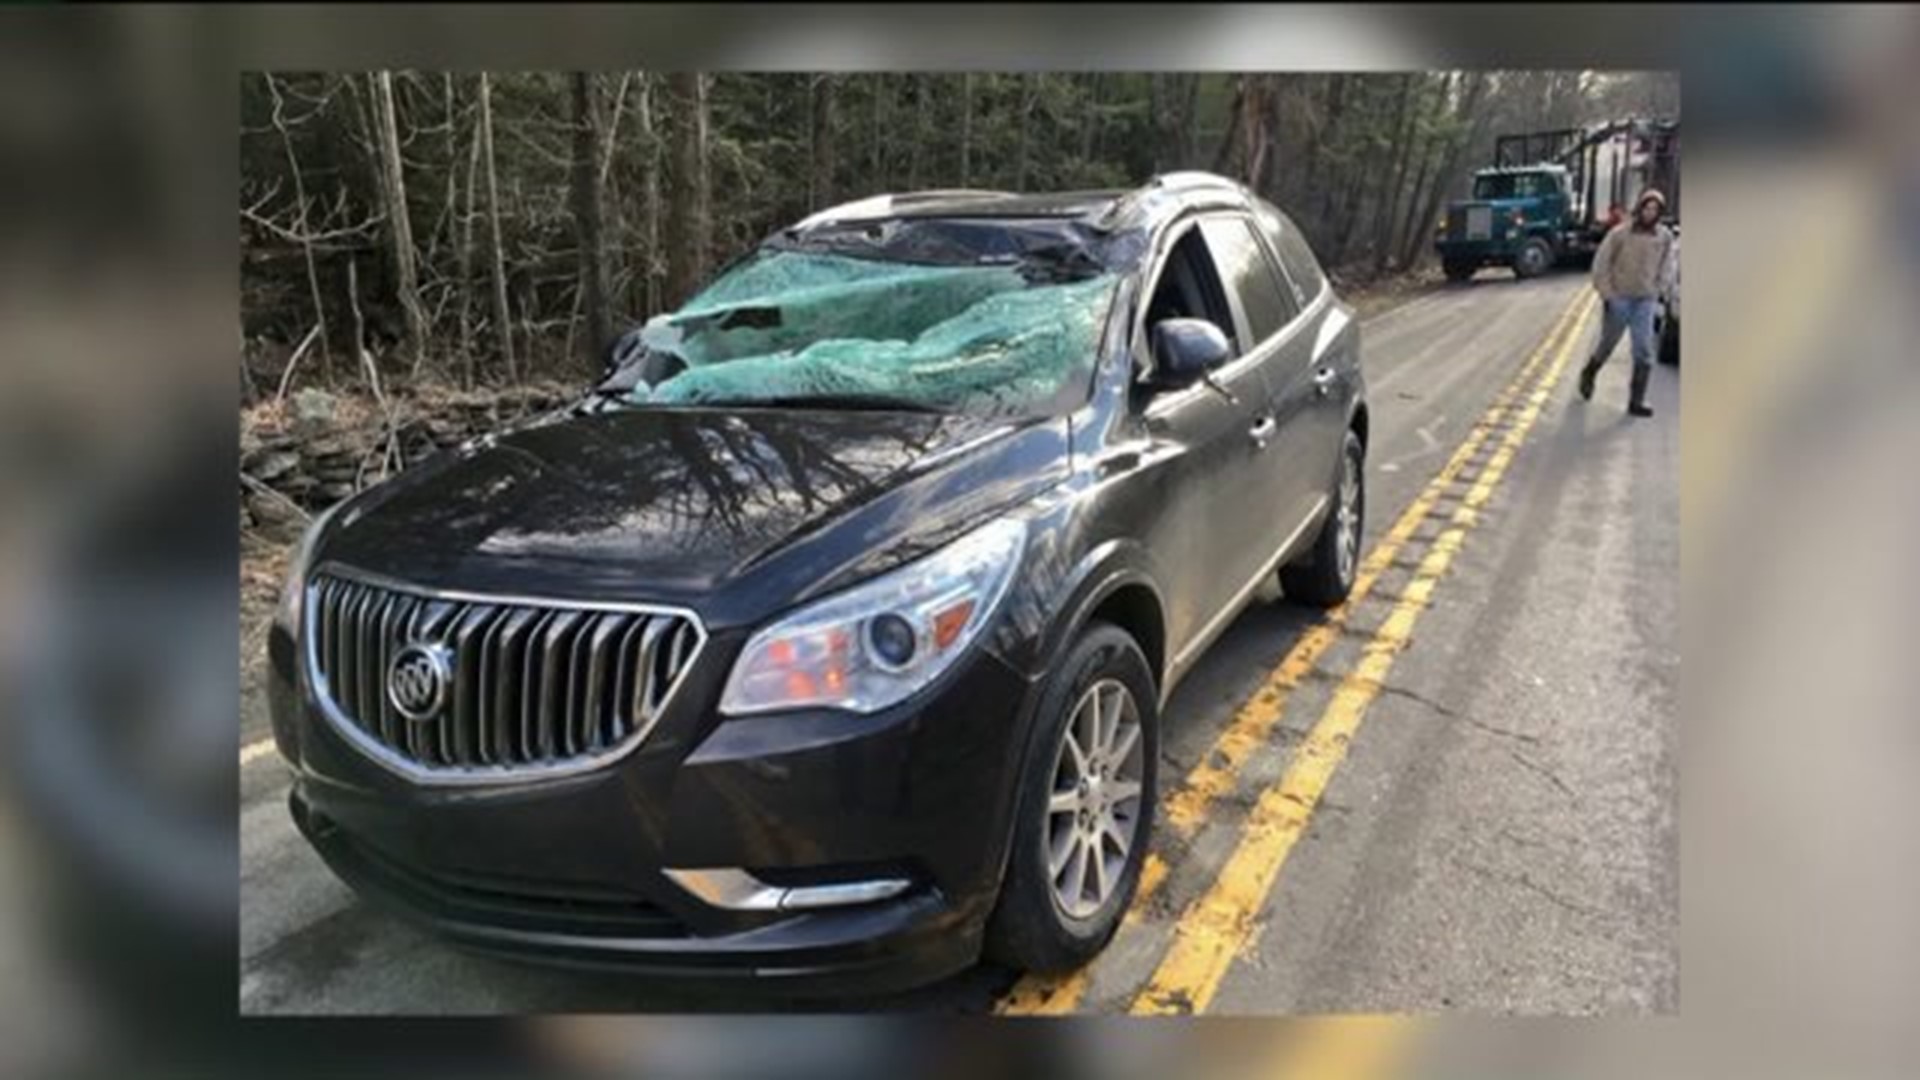 Tree Falls on Family during Morning Commute